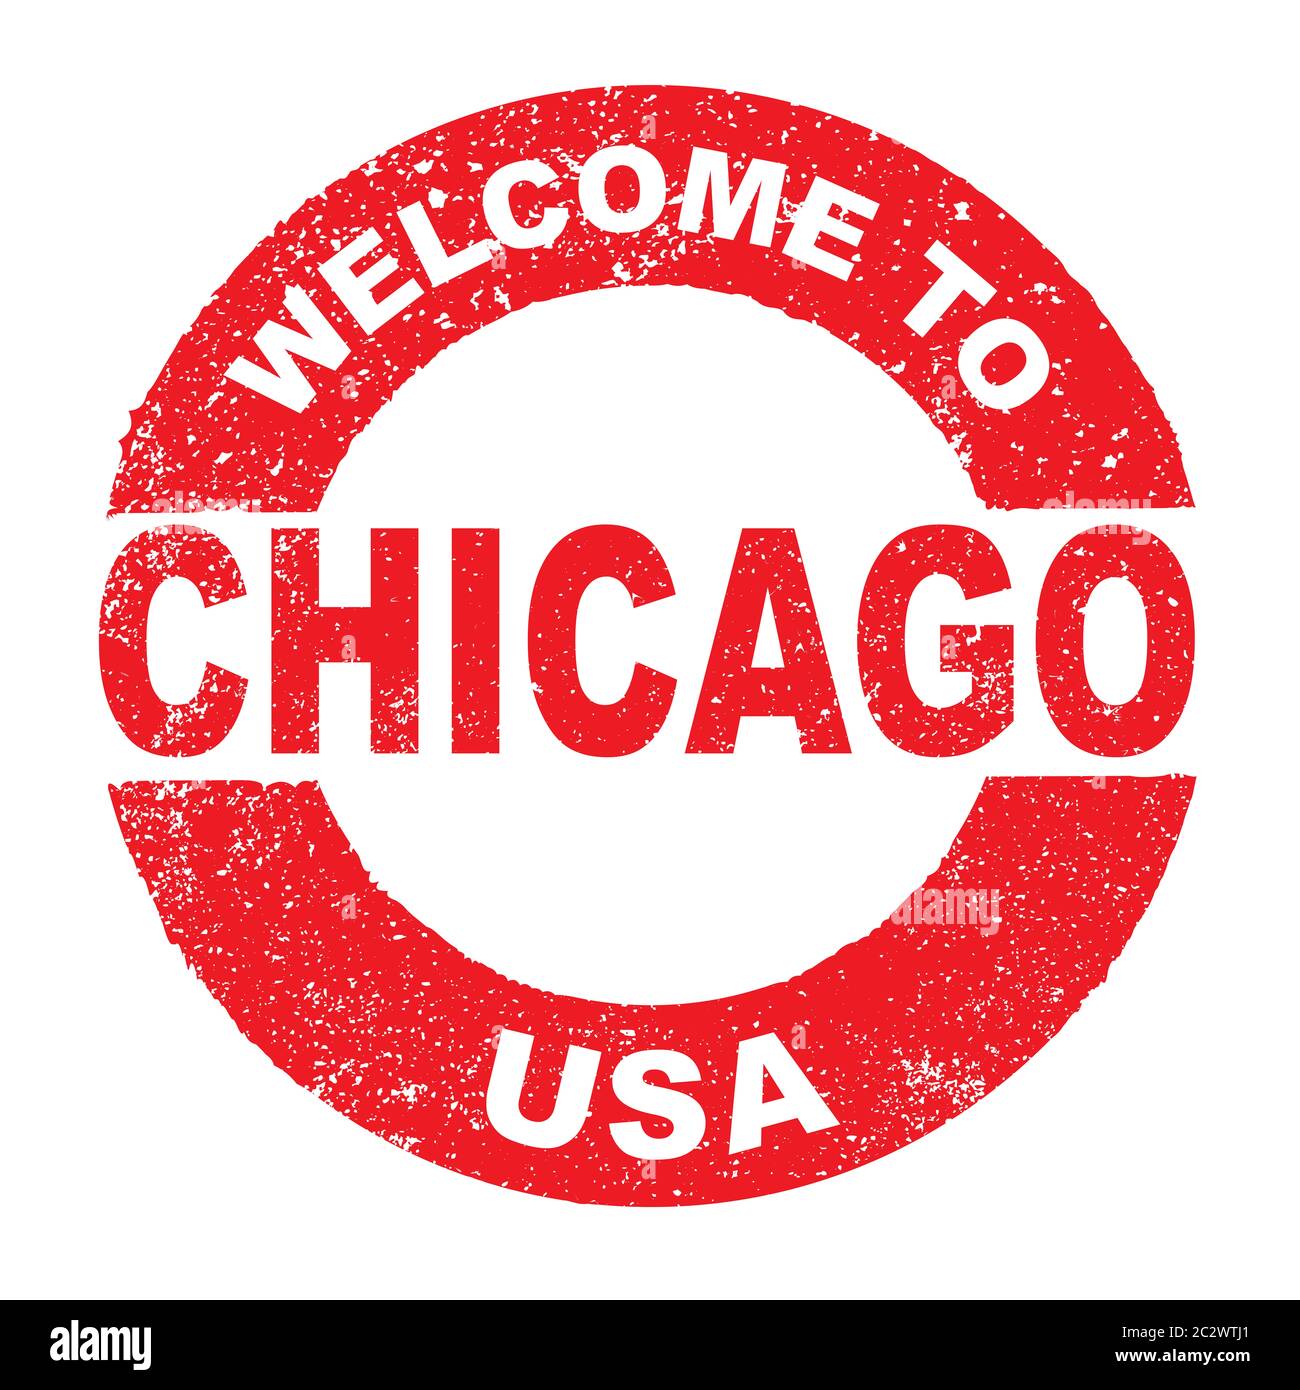 A grunge rubber ink stamp with the text Welcome To Chicago USA over a white background Stock Photo